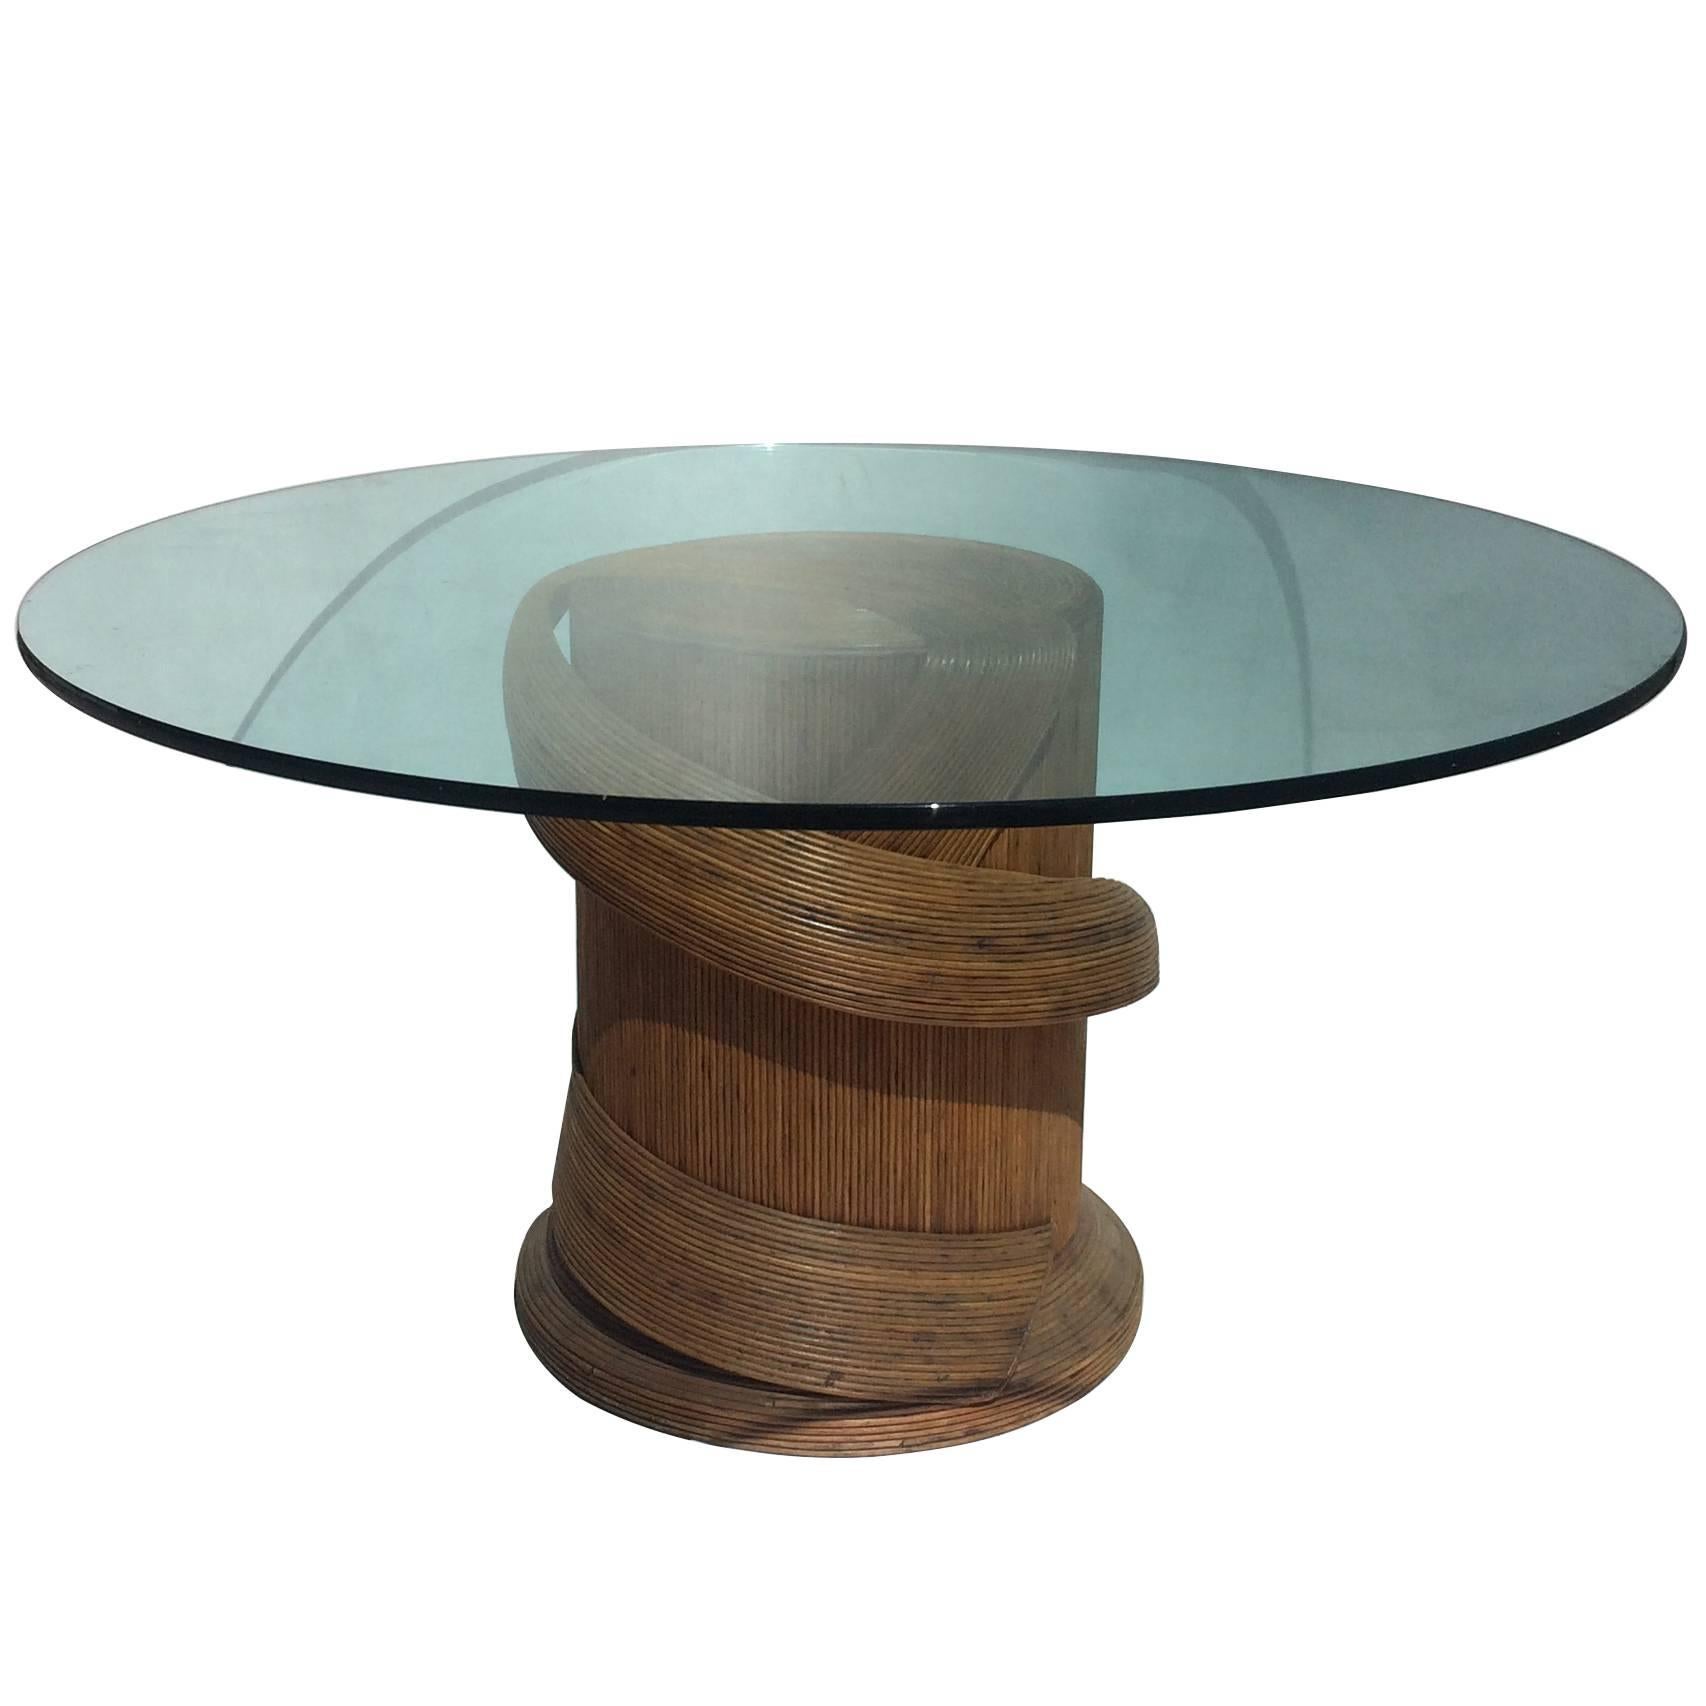 Pencil Rattan Dining Table with Glass Top, Style of Crespi